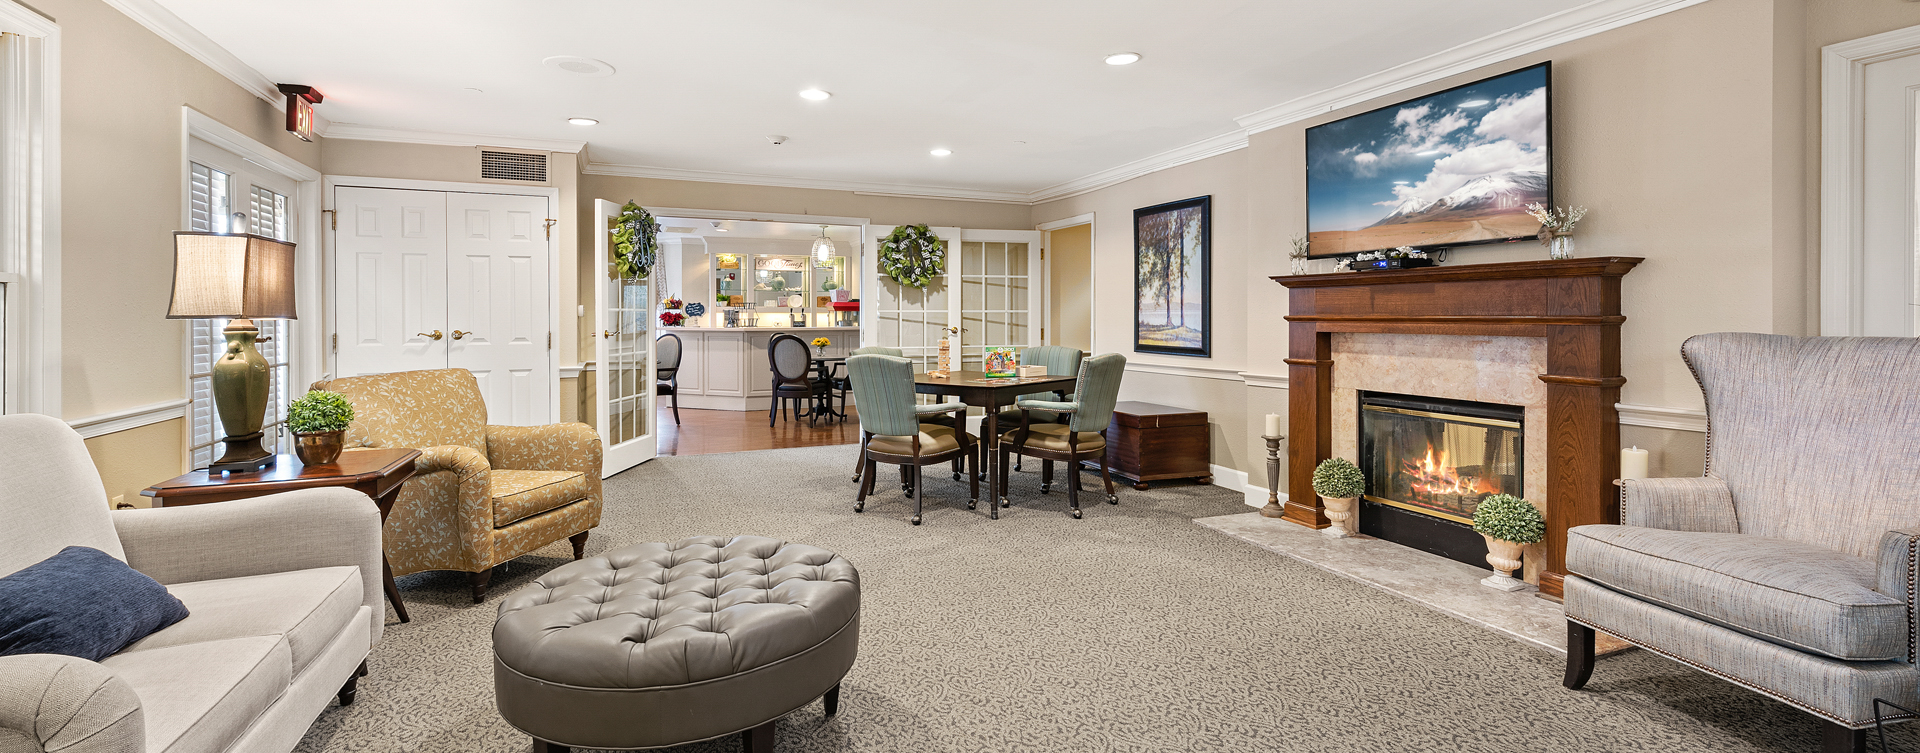 Socialize with friends in the living room at Bickford of Bexley